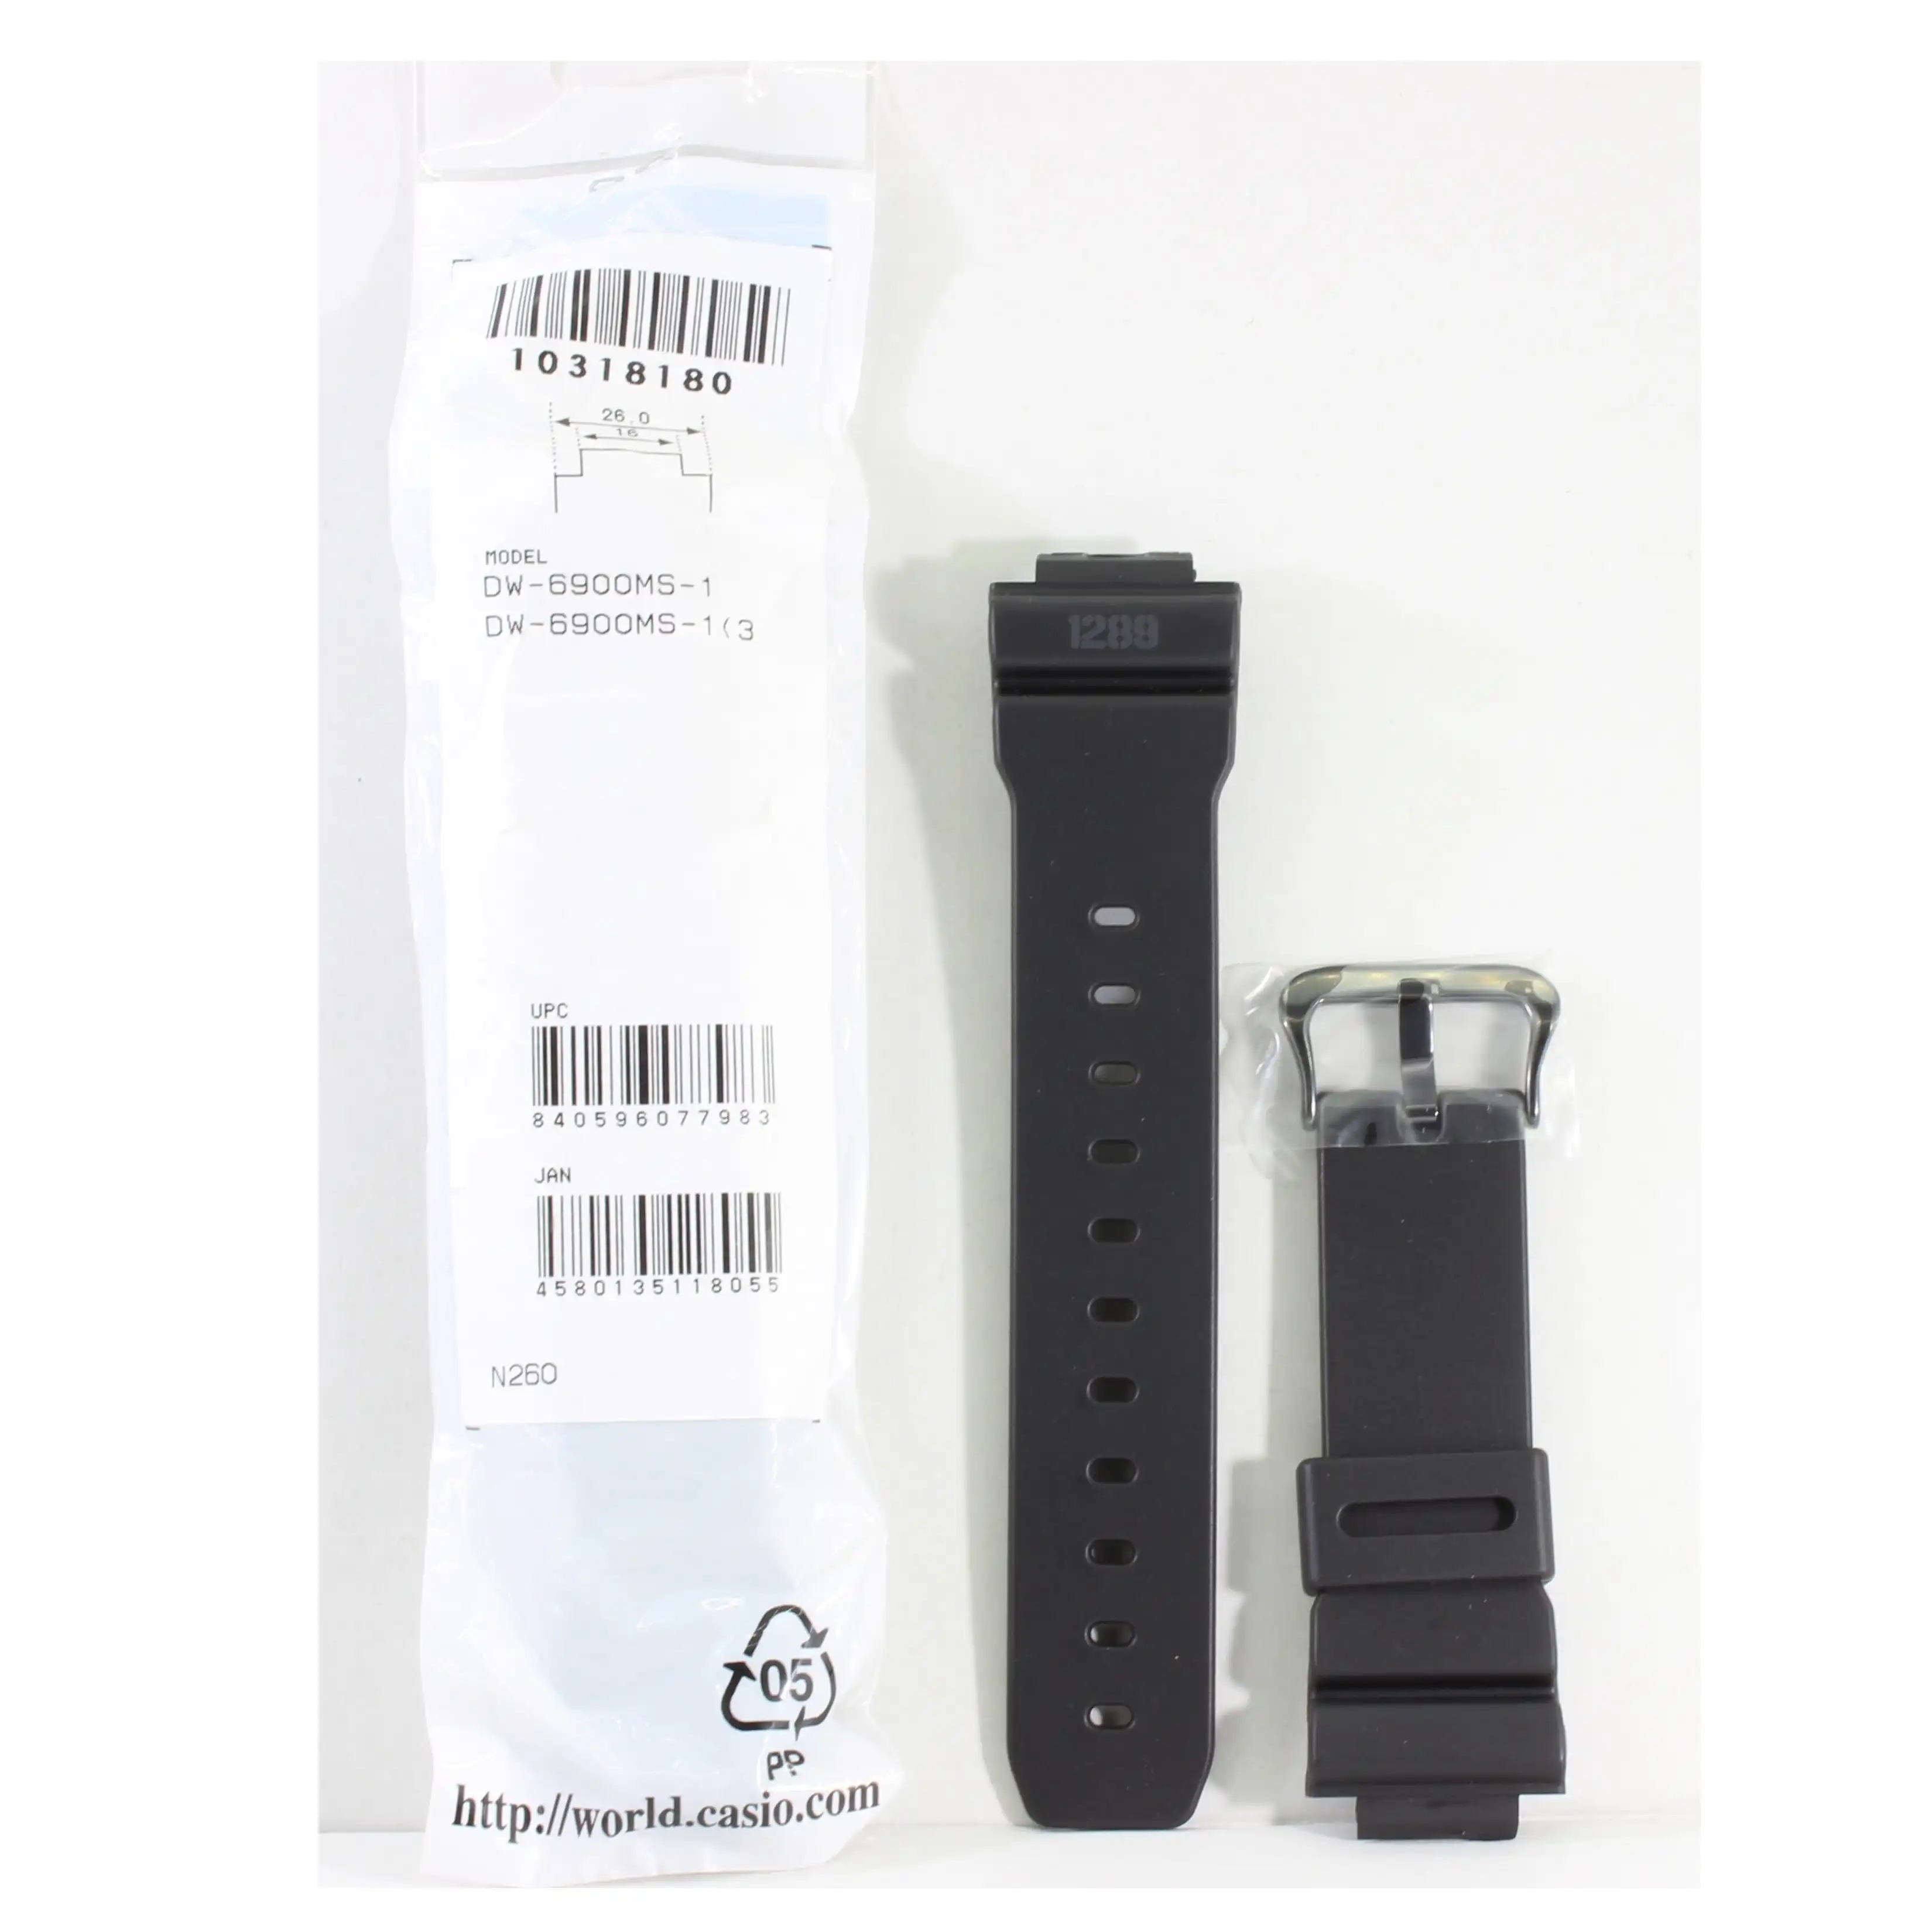 Casio G-Shock Matte Black Genuine Replacement Strap 10318180 to suit DW-6900MS-1